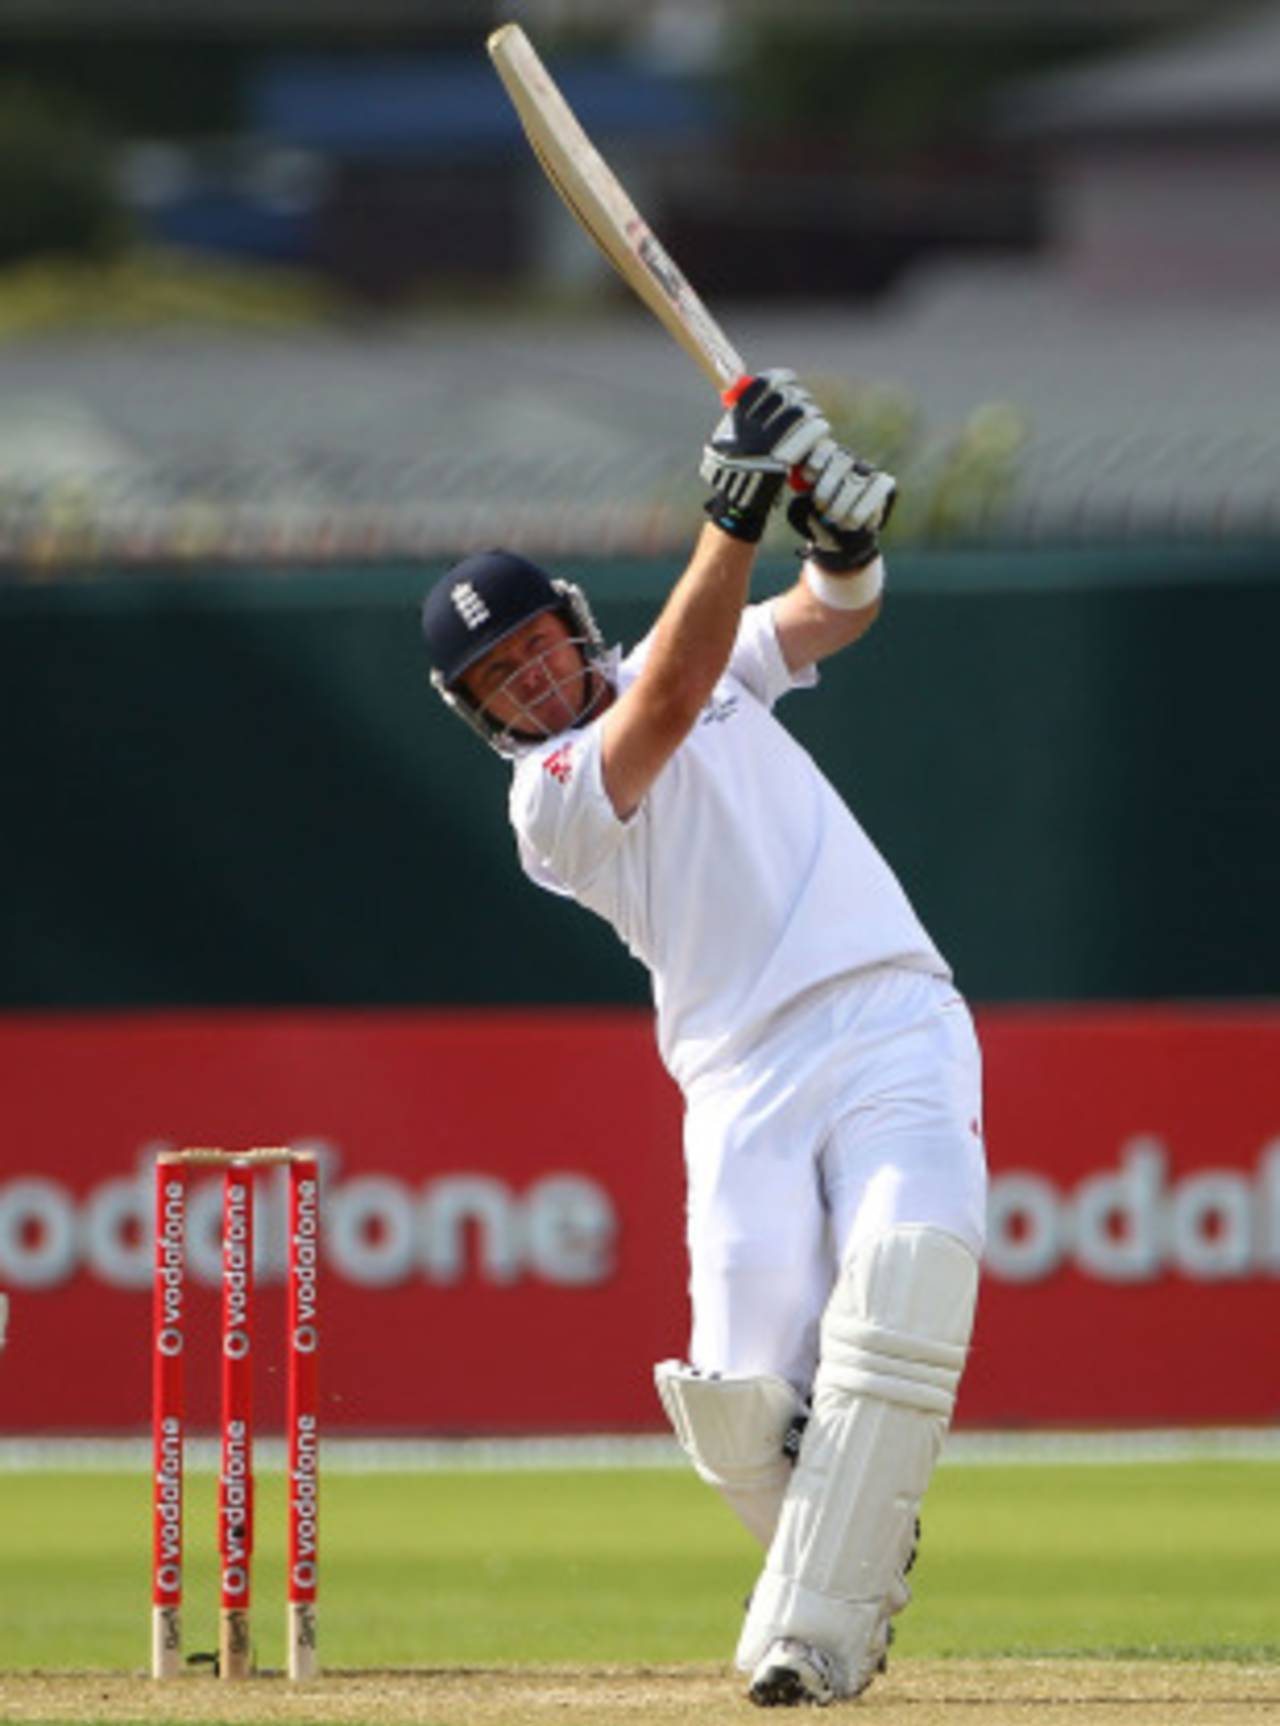 Ian Bell goes over the top during his century, Australia A v England, Hobart, 2nd day, November 18, 2010